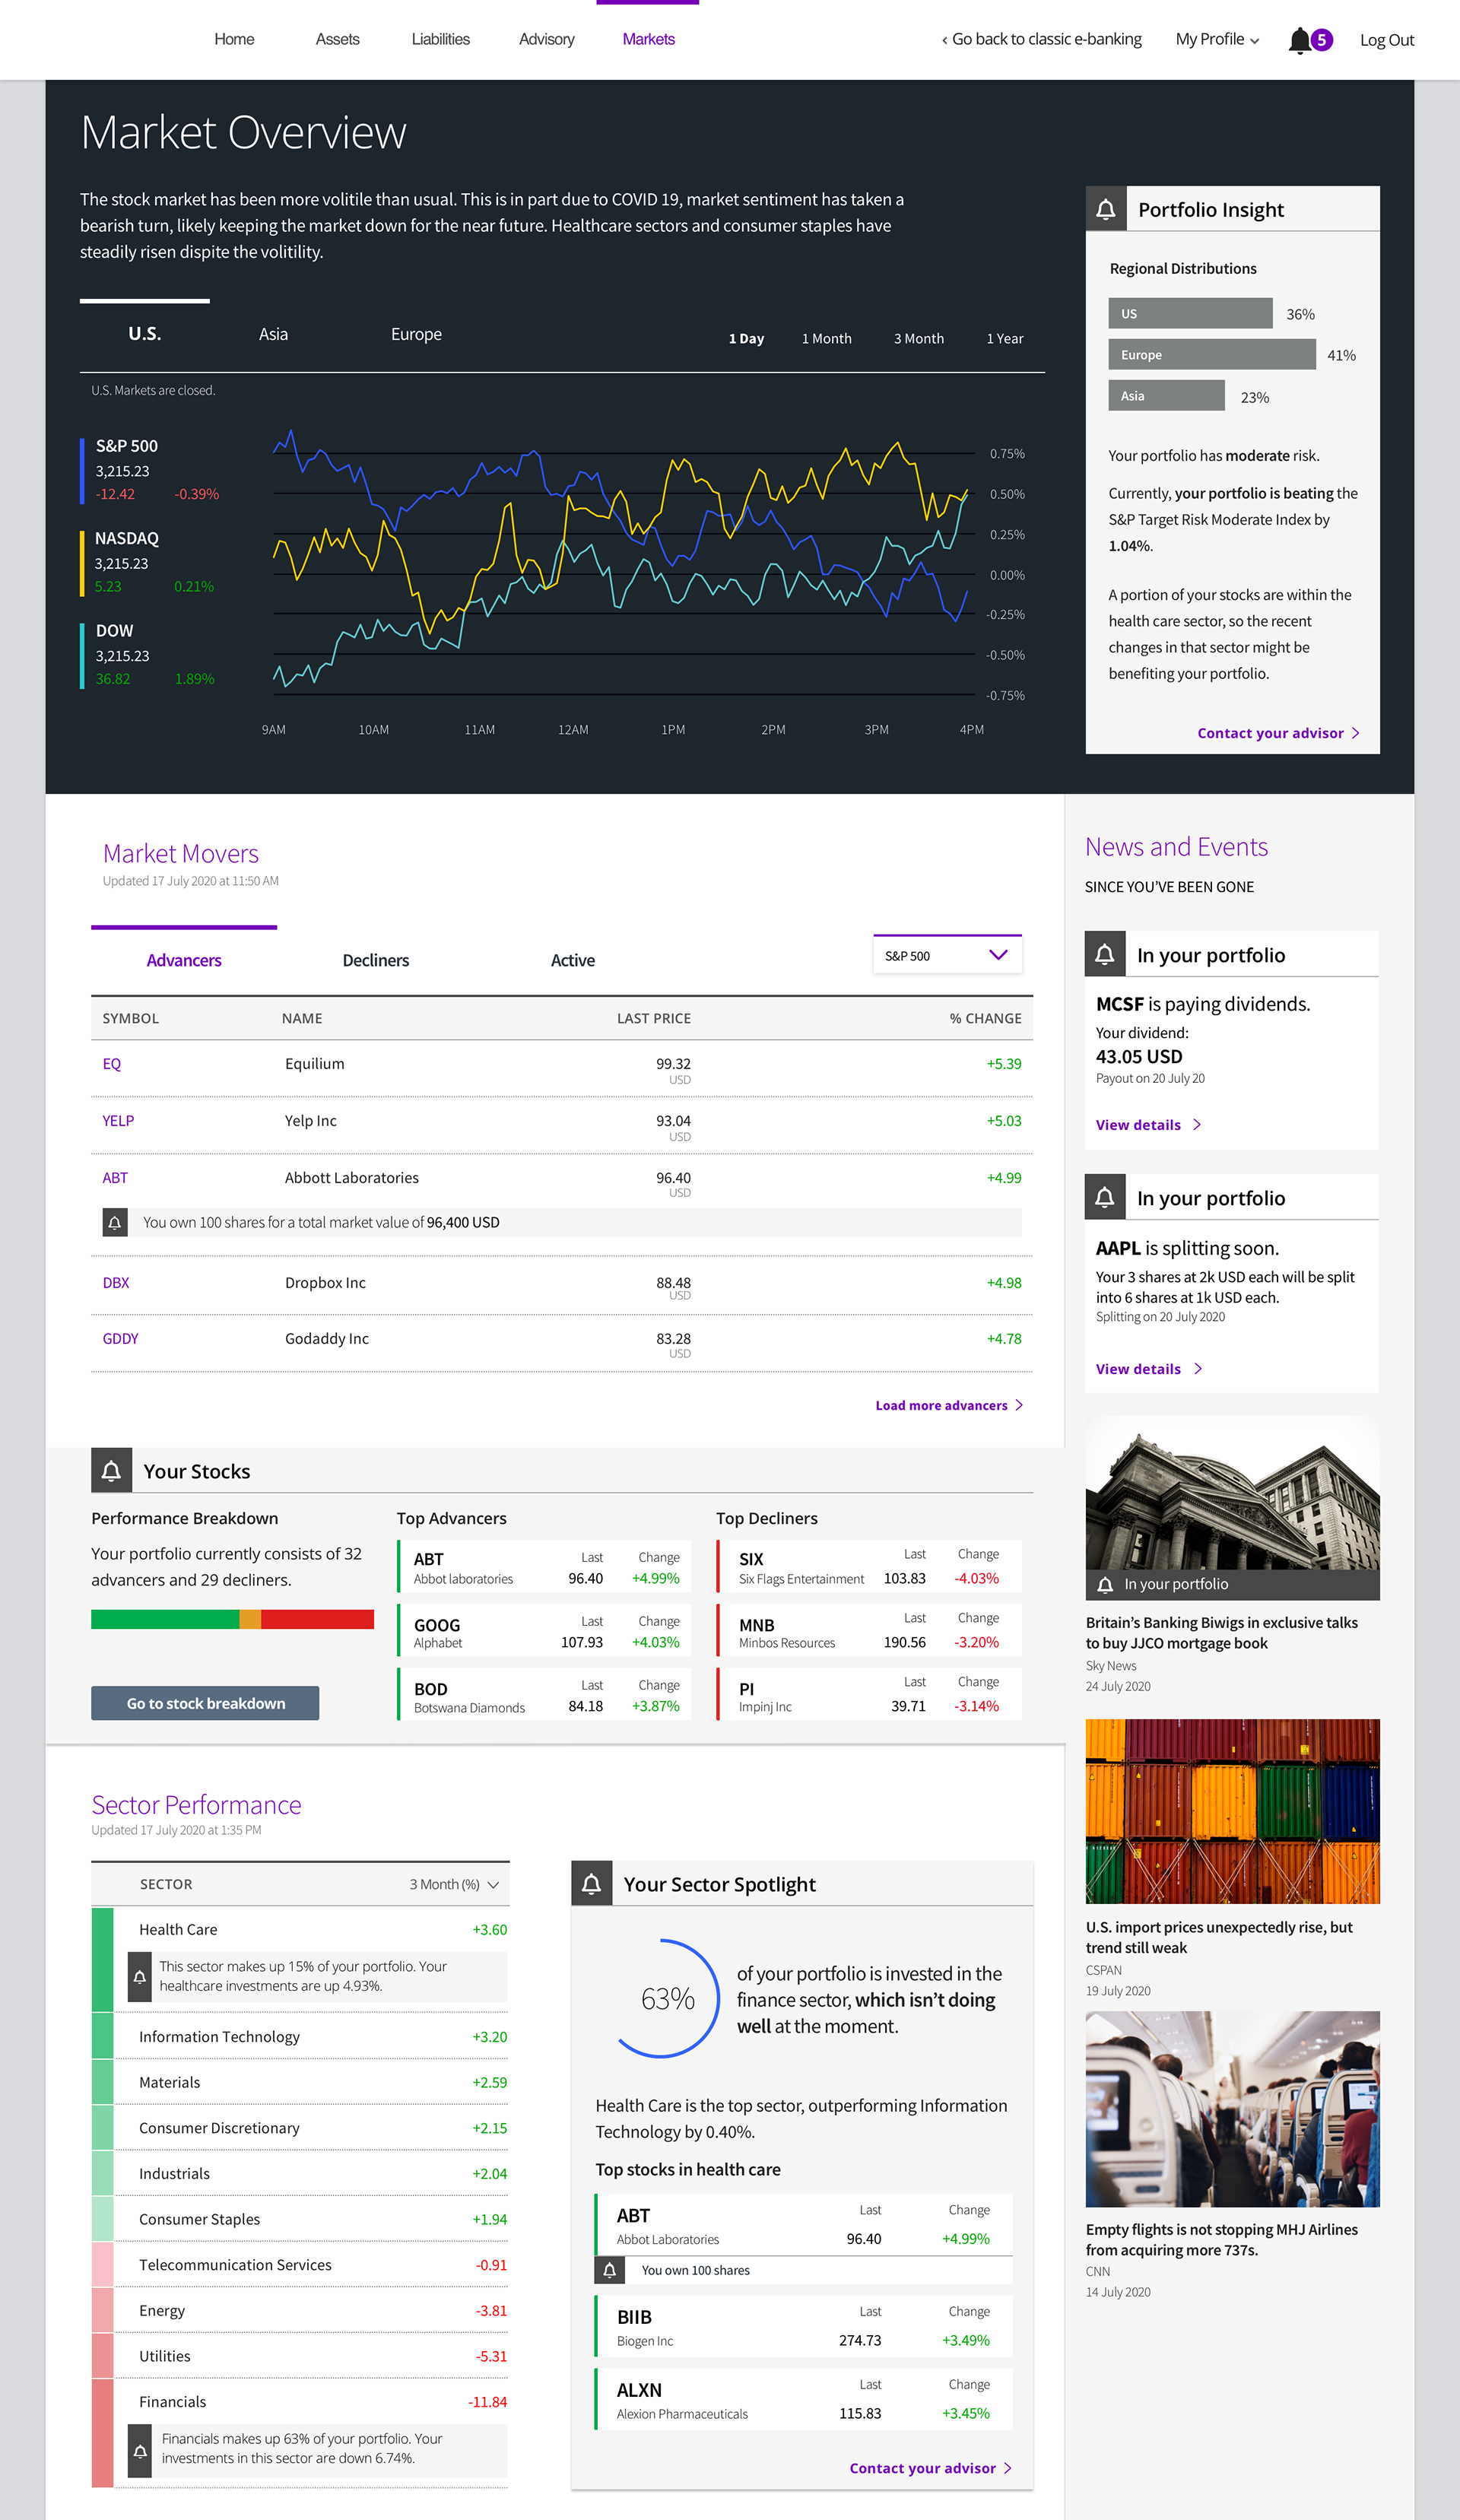 Image of the market overvierw page UI design